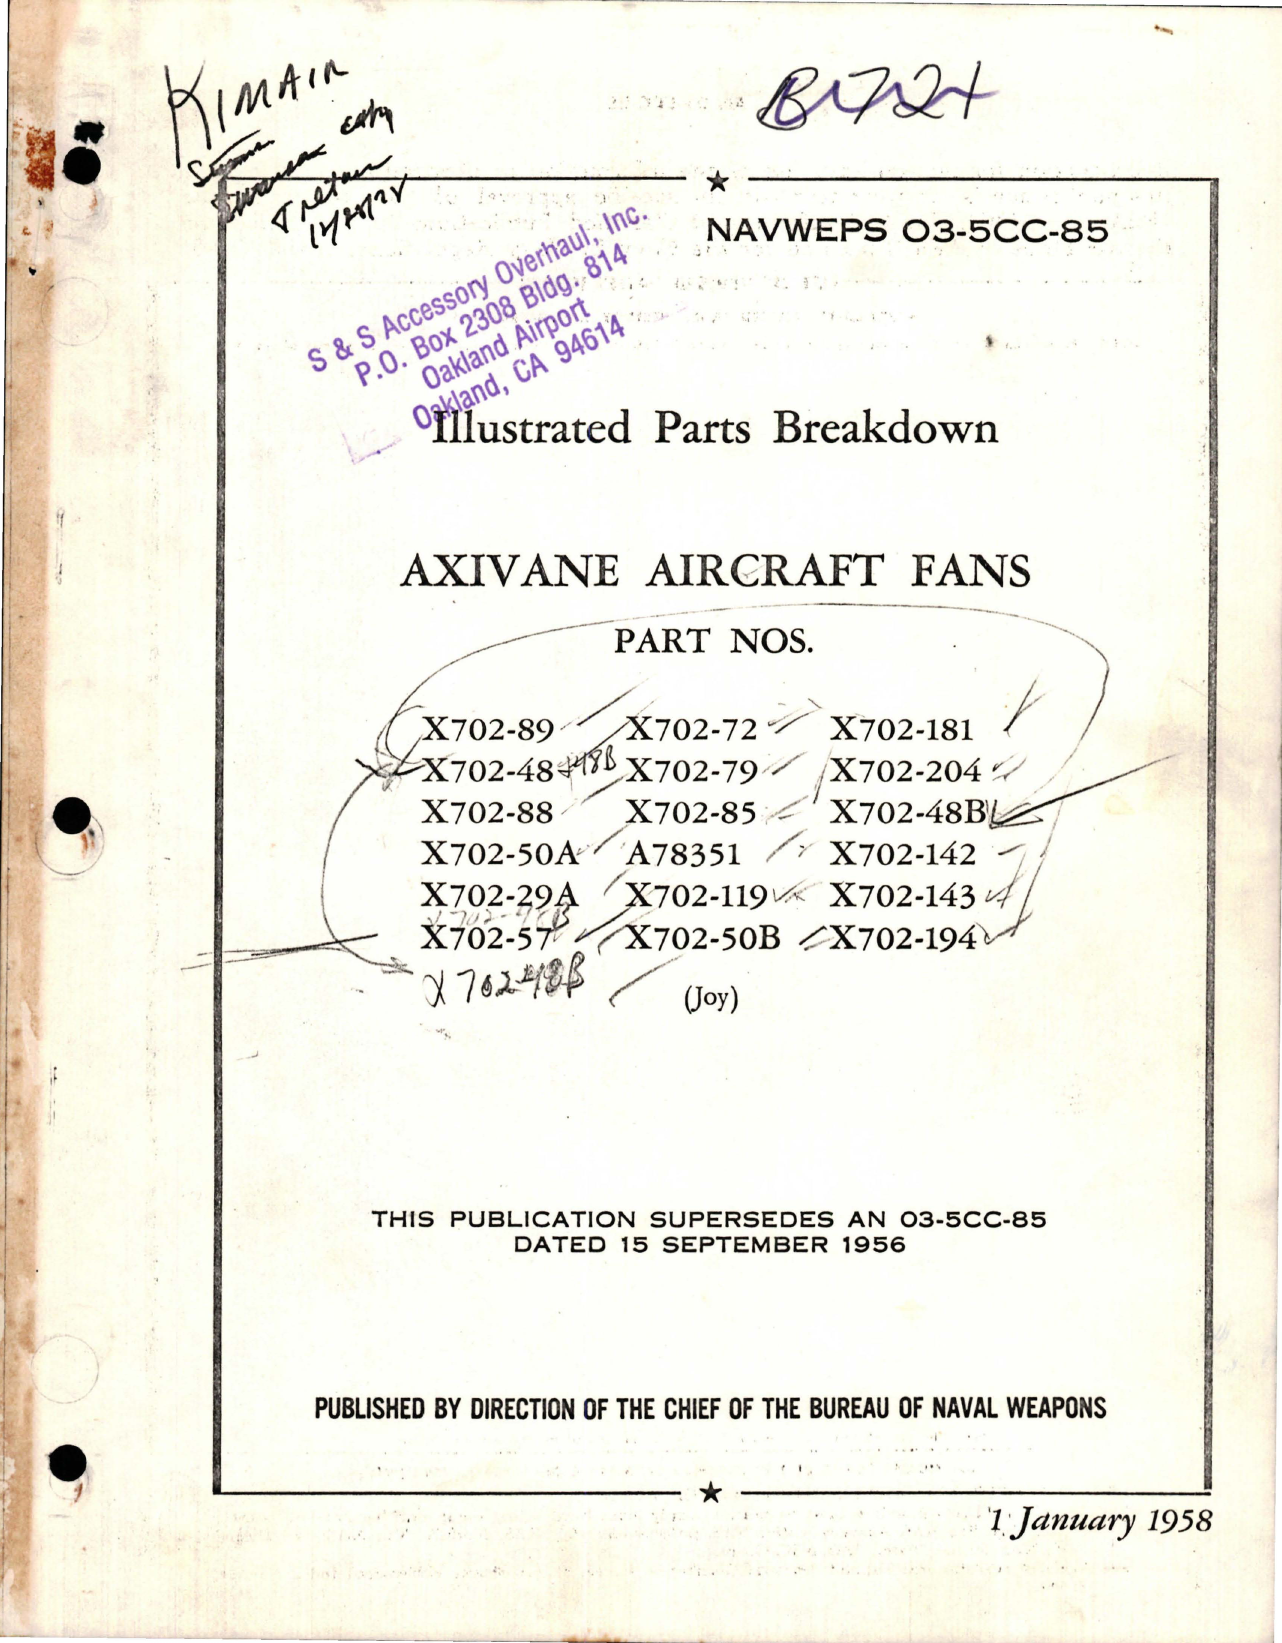 Sample page 1 from AirCorps Library document: Illustrated Parts Breakdown for Axivane Aircraft Fans